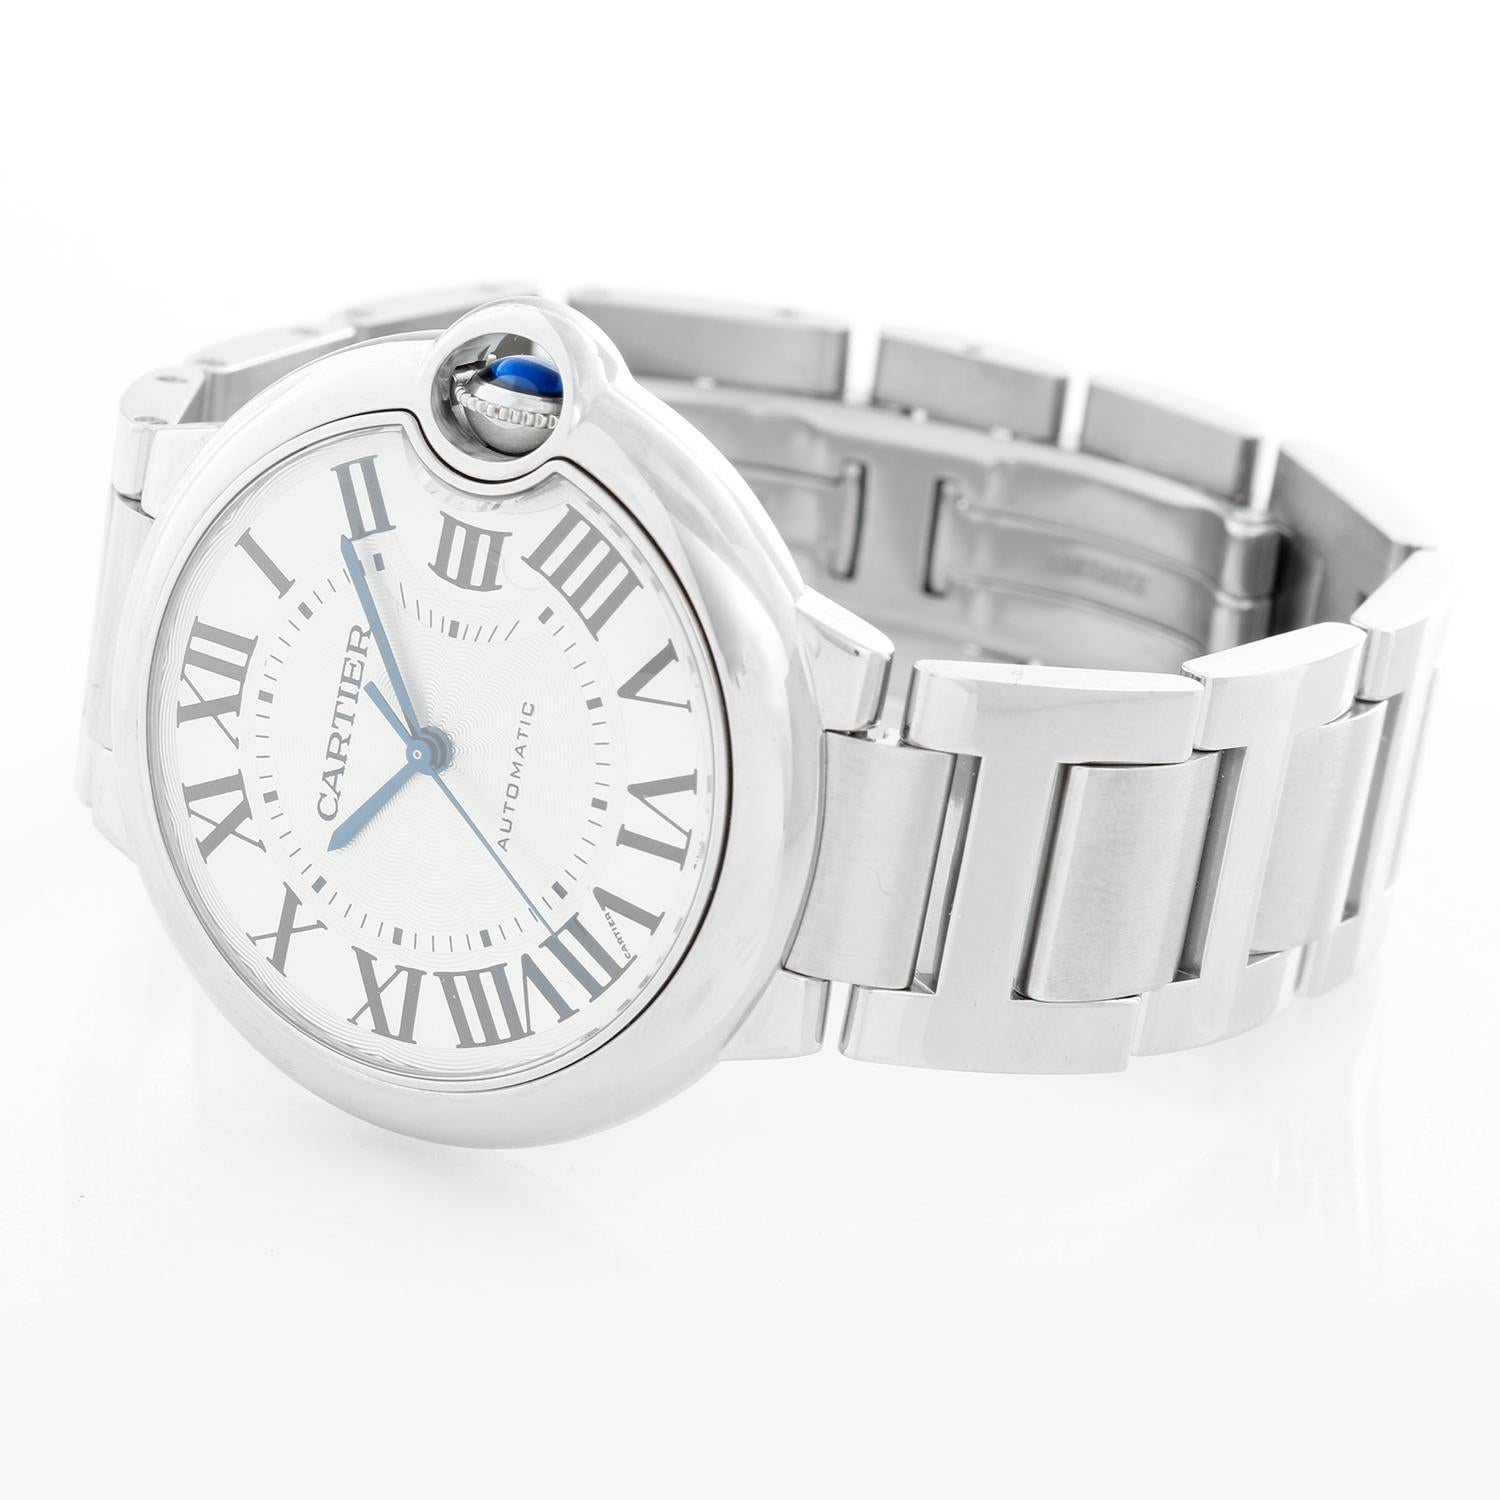 Cartier Ballon Bleu Midsize Stainless Steel Watch W6920046 3284 - Automatic. Stainless steel case (36mm). Silver guilloche dial with black Roman numerals. Stainless steel Cartier bracelet with deployant clasp. Pre-owned with custom box. 